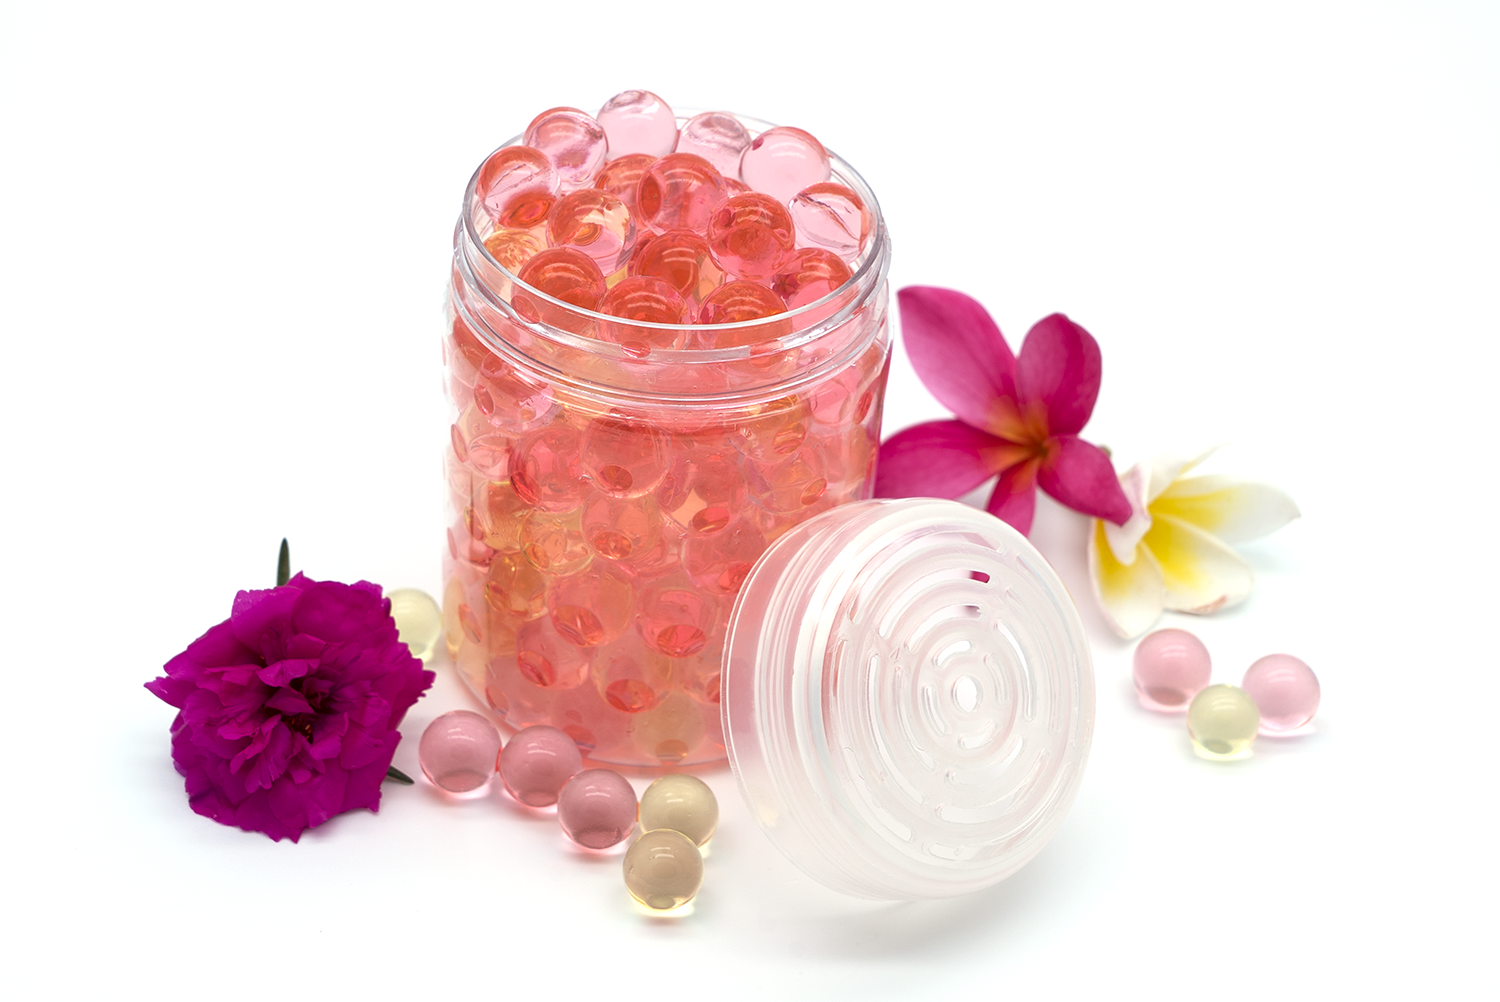 Demi green environmental fragrance beads to ensure the best possible food for home